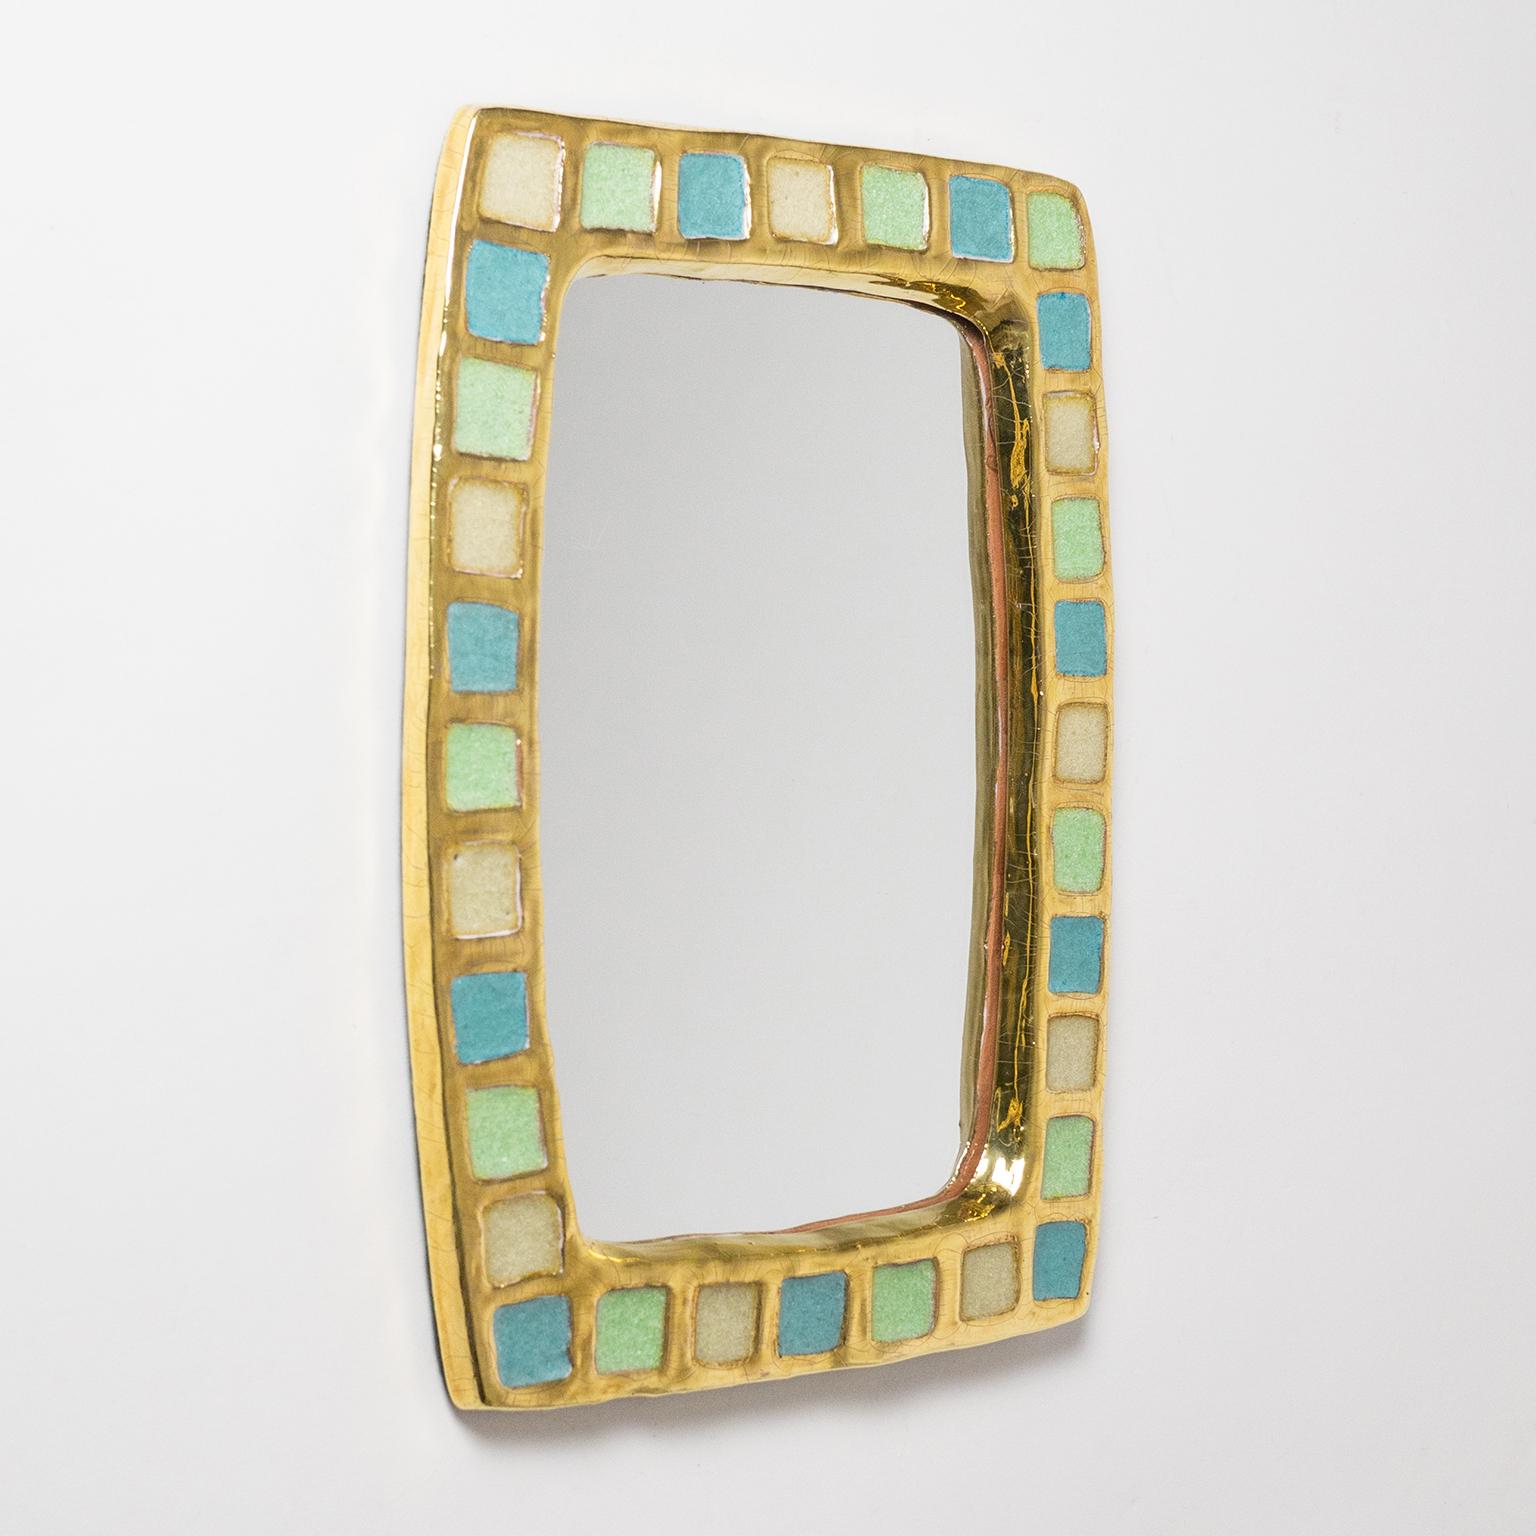 Lovely ceramic mirror by Mithé Espelt, one of the great French midcentury ceramic artists. Organic rectangular frame with gold glazing and muted pastel insets in three colors. Very fine original condition. Do to the glossy gold glazing on the